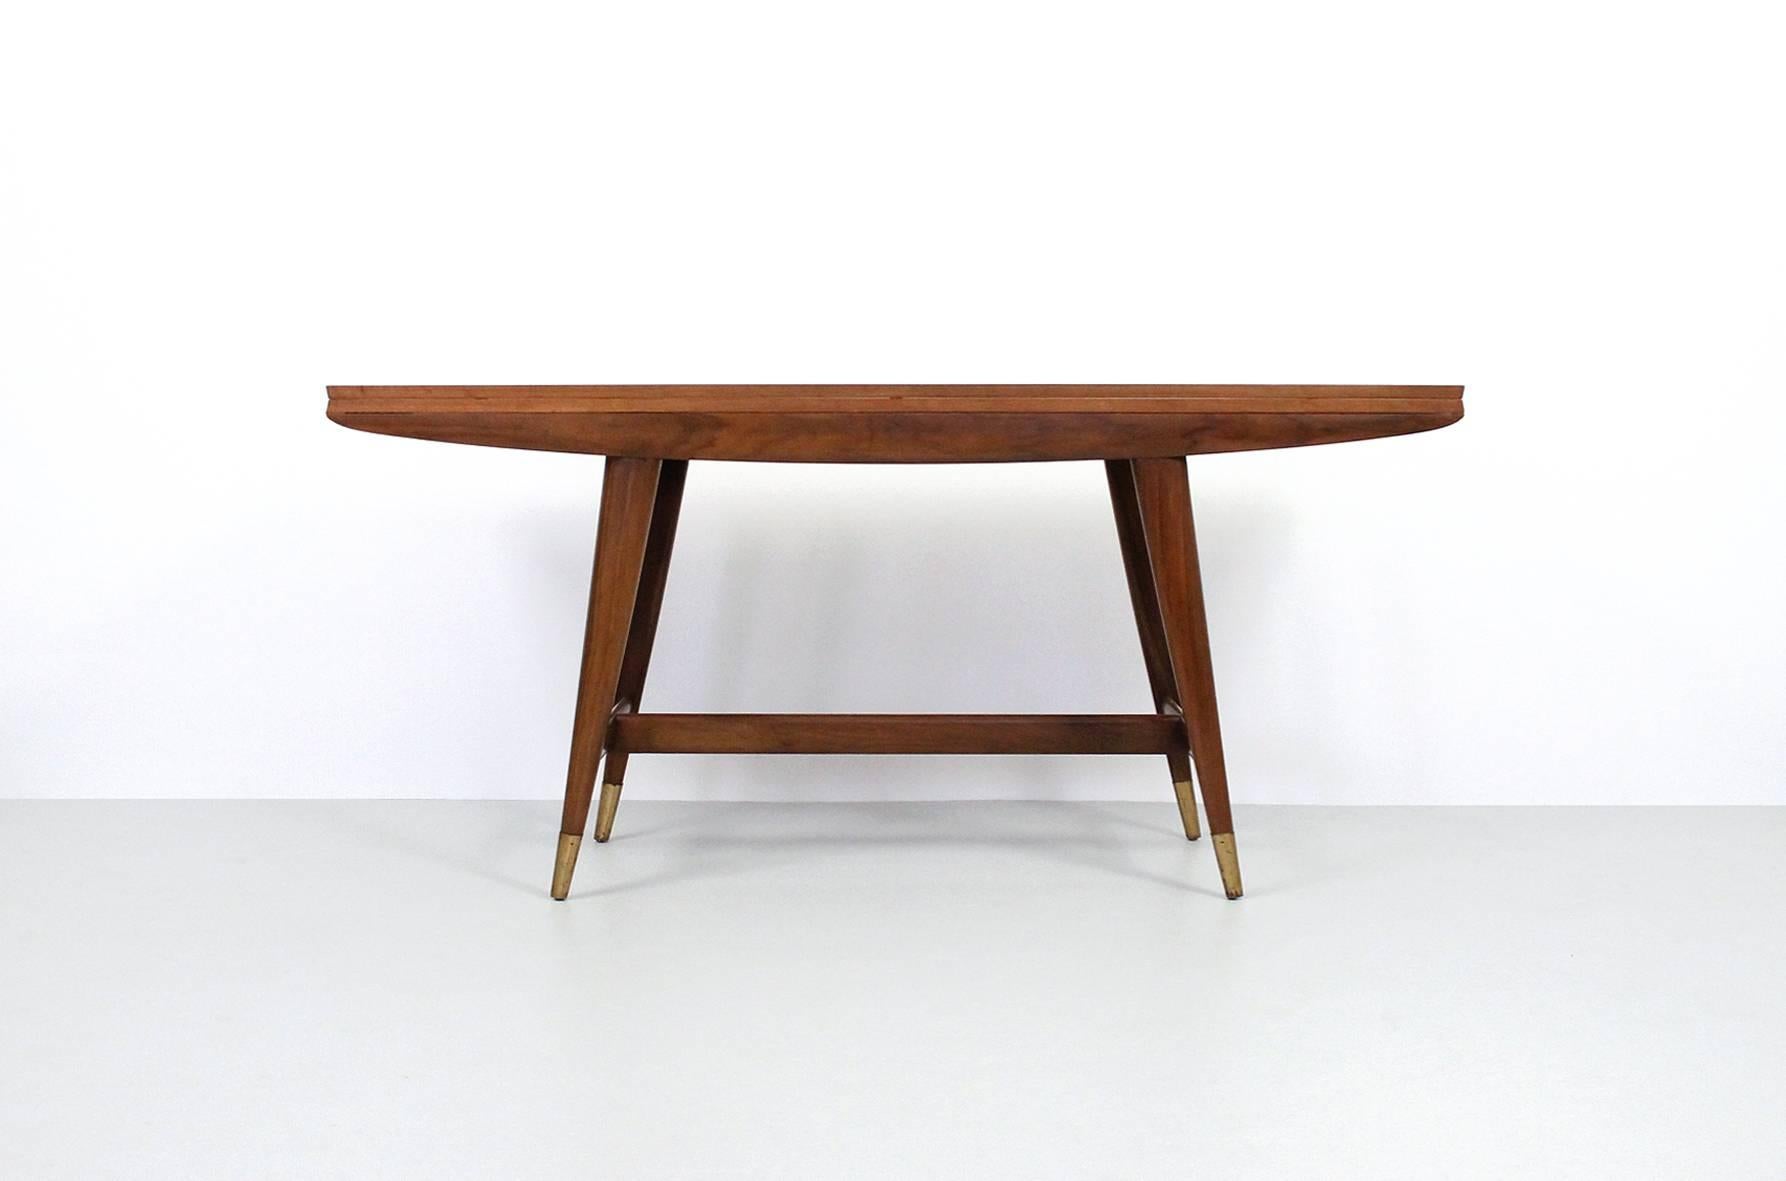 Gio Ponti for Singer & Sons flip-top console or dining table. Executed in walnut with brass hinges and sabots. This is model 2134 from the 